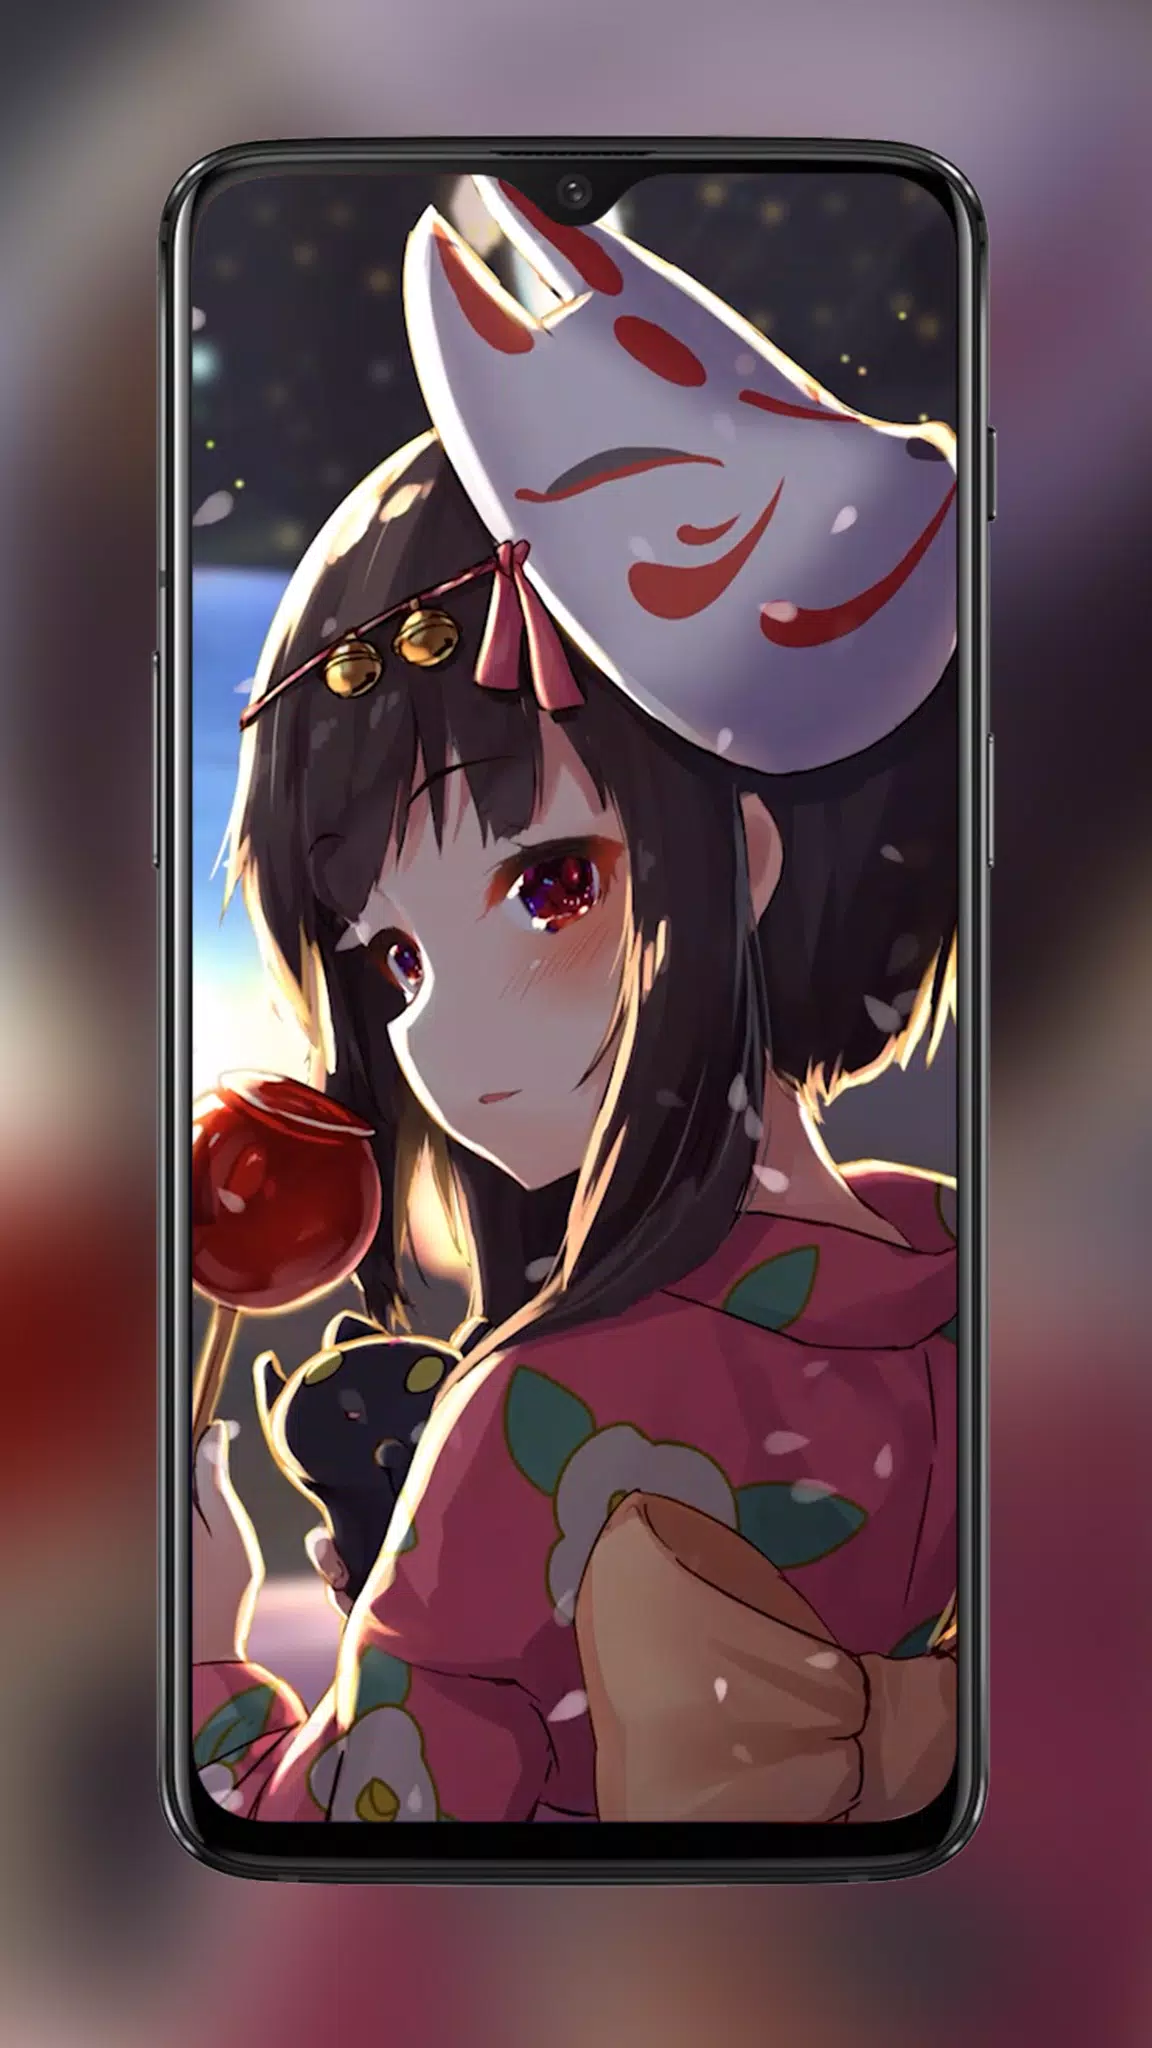 Megumin in Yukata Anime Girl Live Wallpapers APK for Android Download